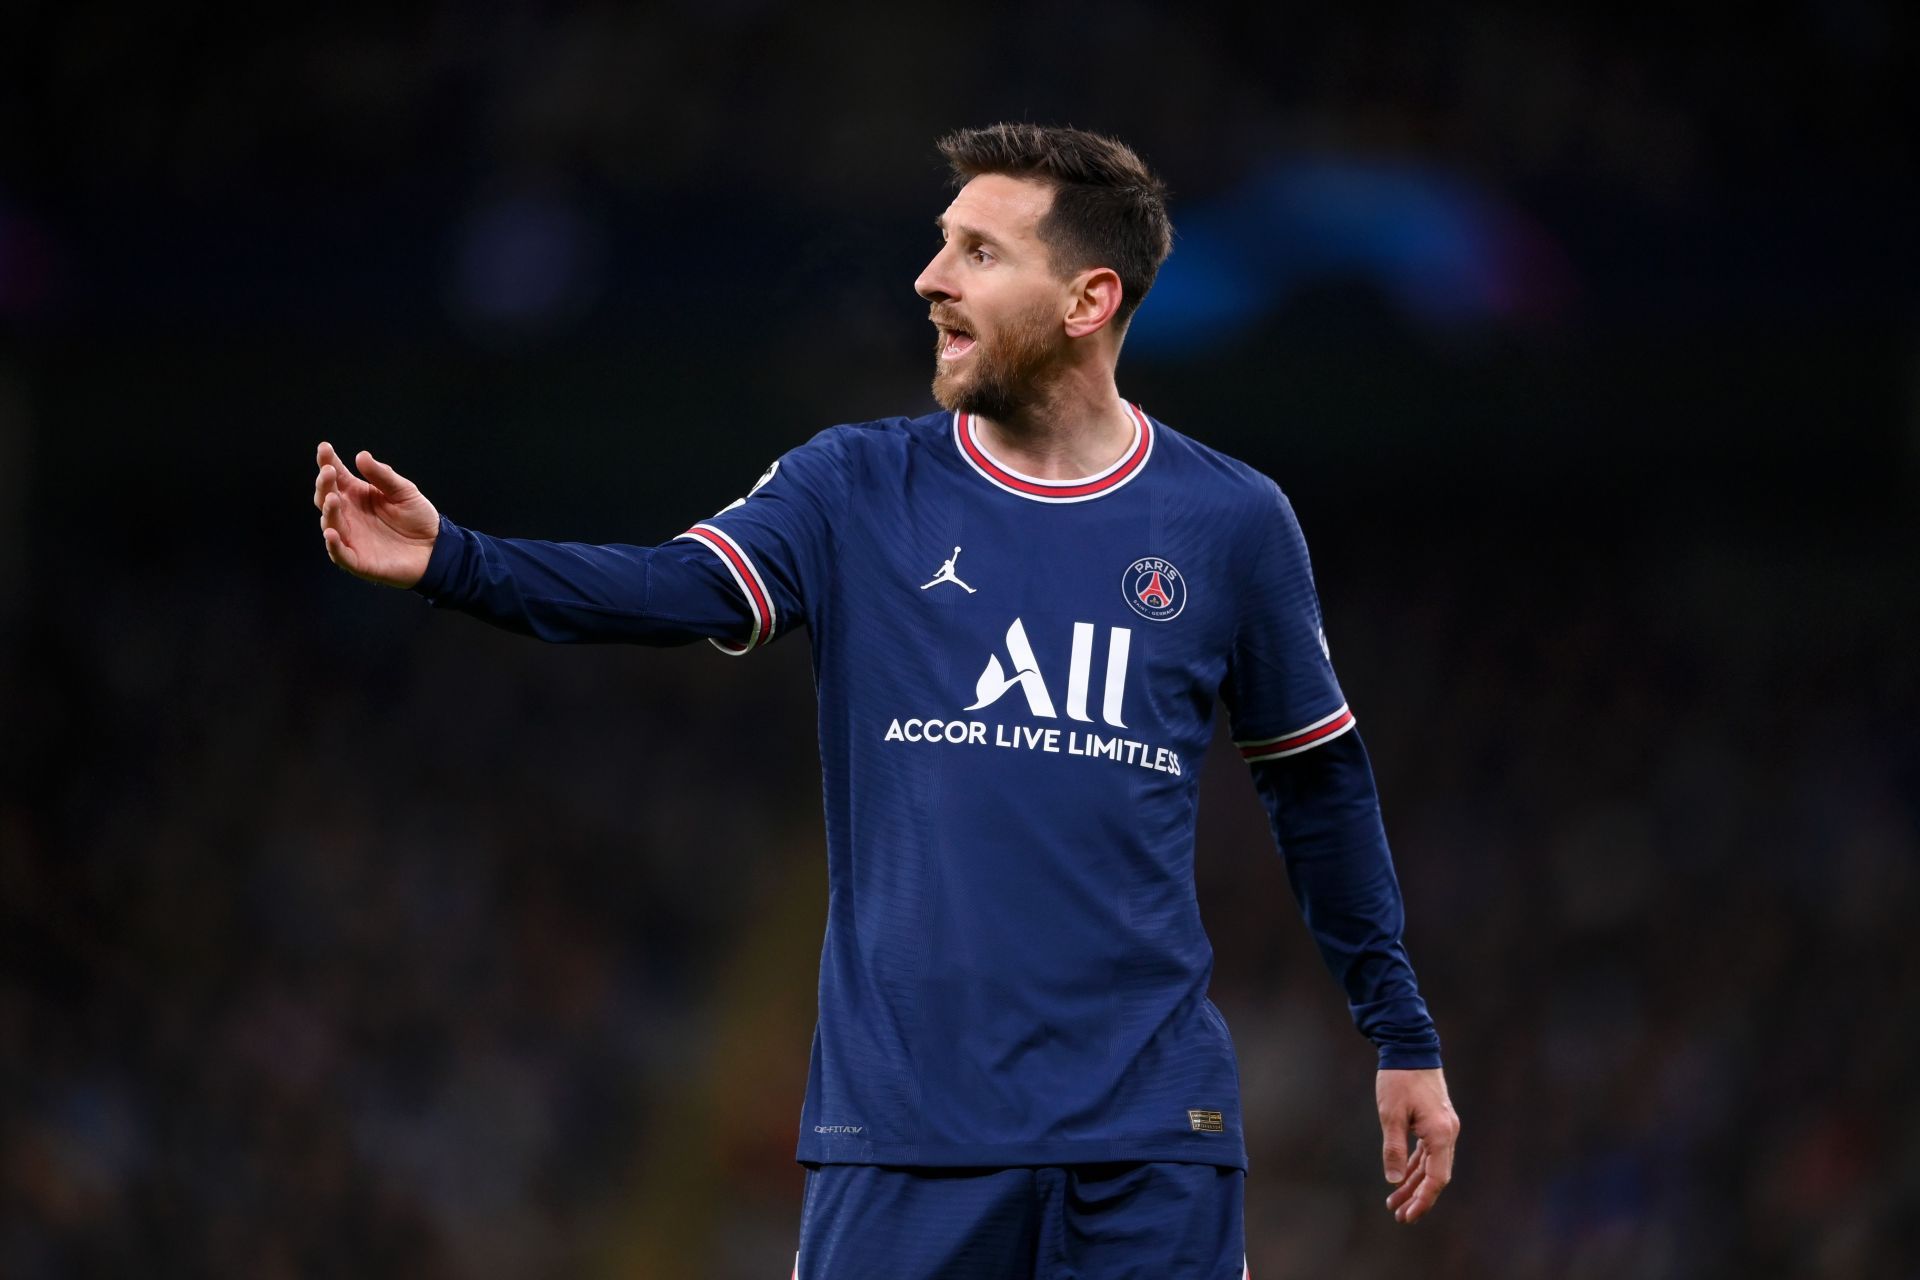 Messi has returned to the Paris Saint-Germain squad. (Photo by Laurence Griffiths/Getty Images)